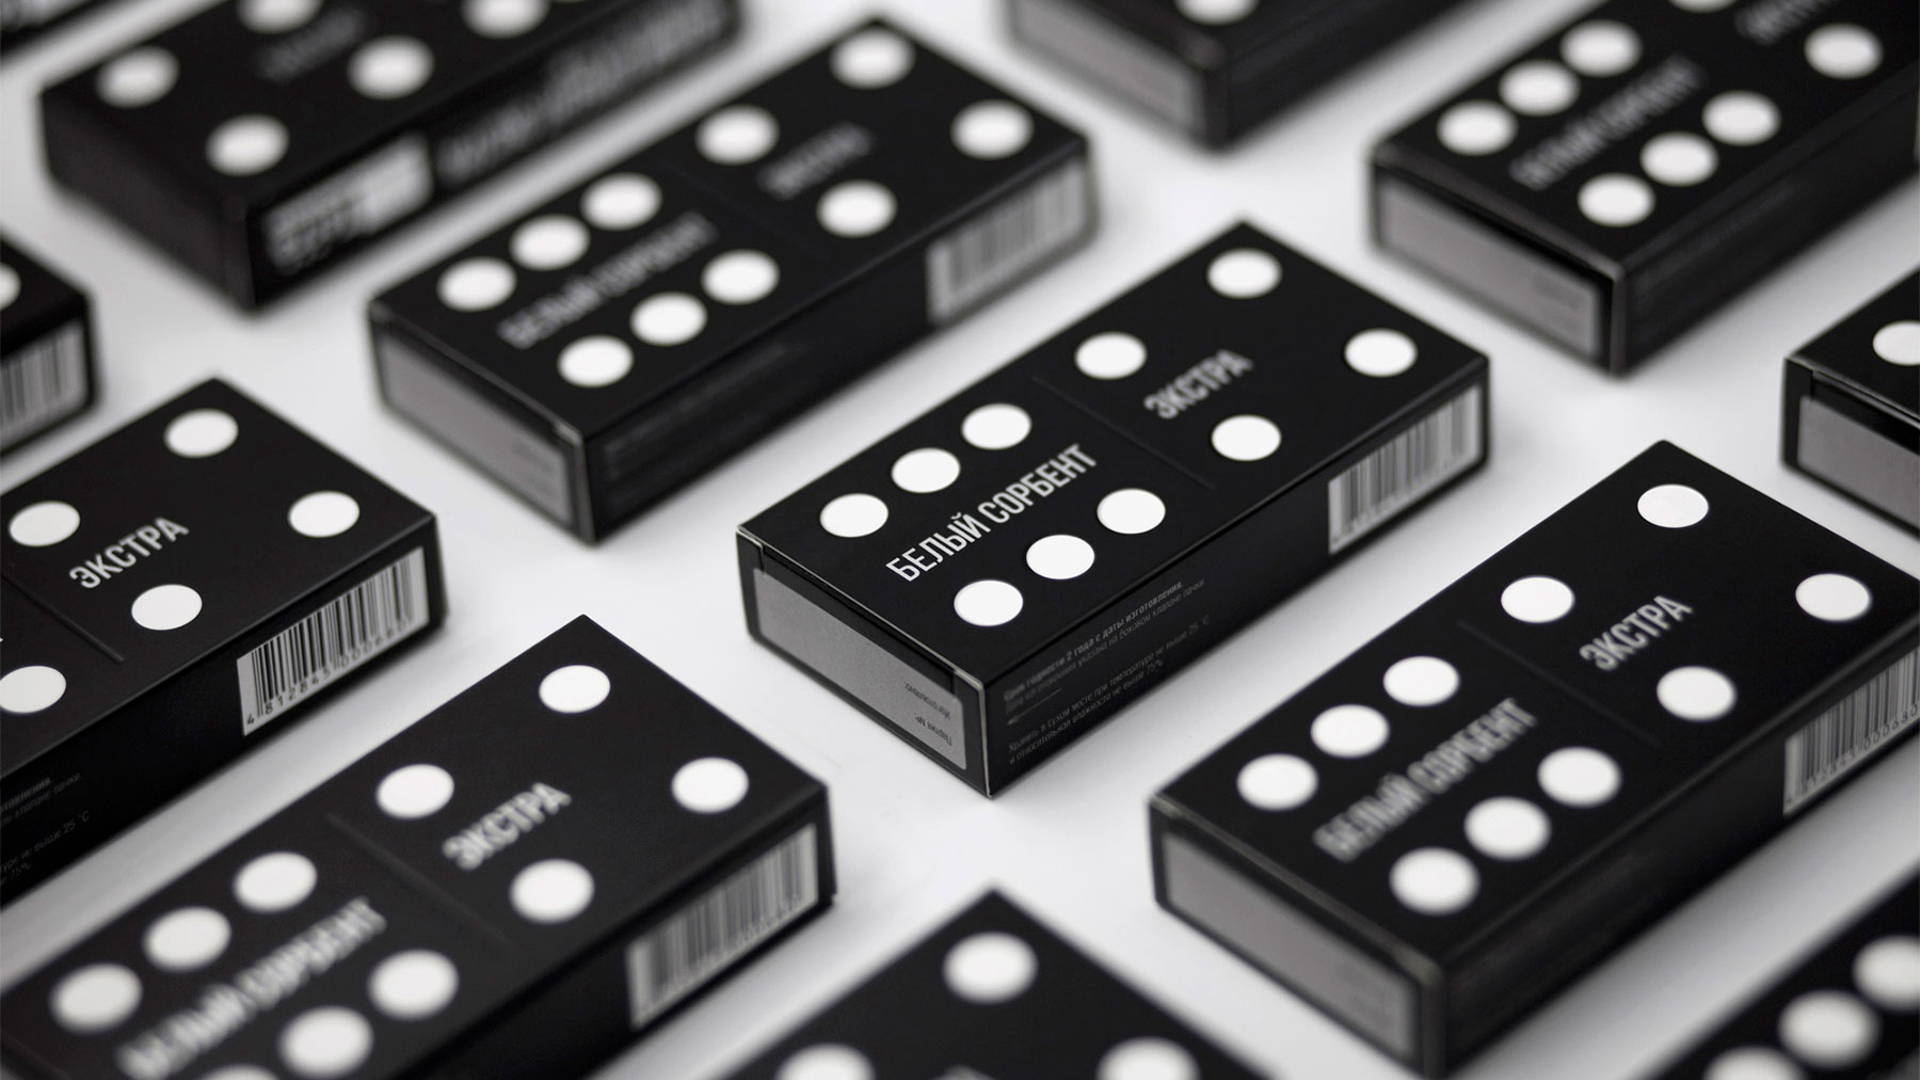 Featured image for This Clever Health Supplement Brand Packaging Comes In The Shape of a Domino